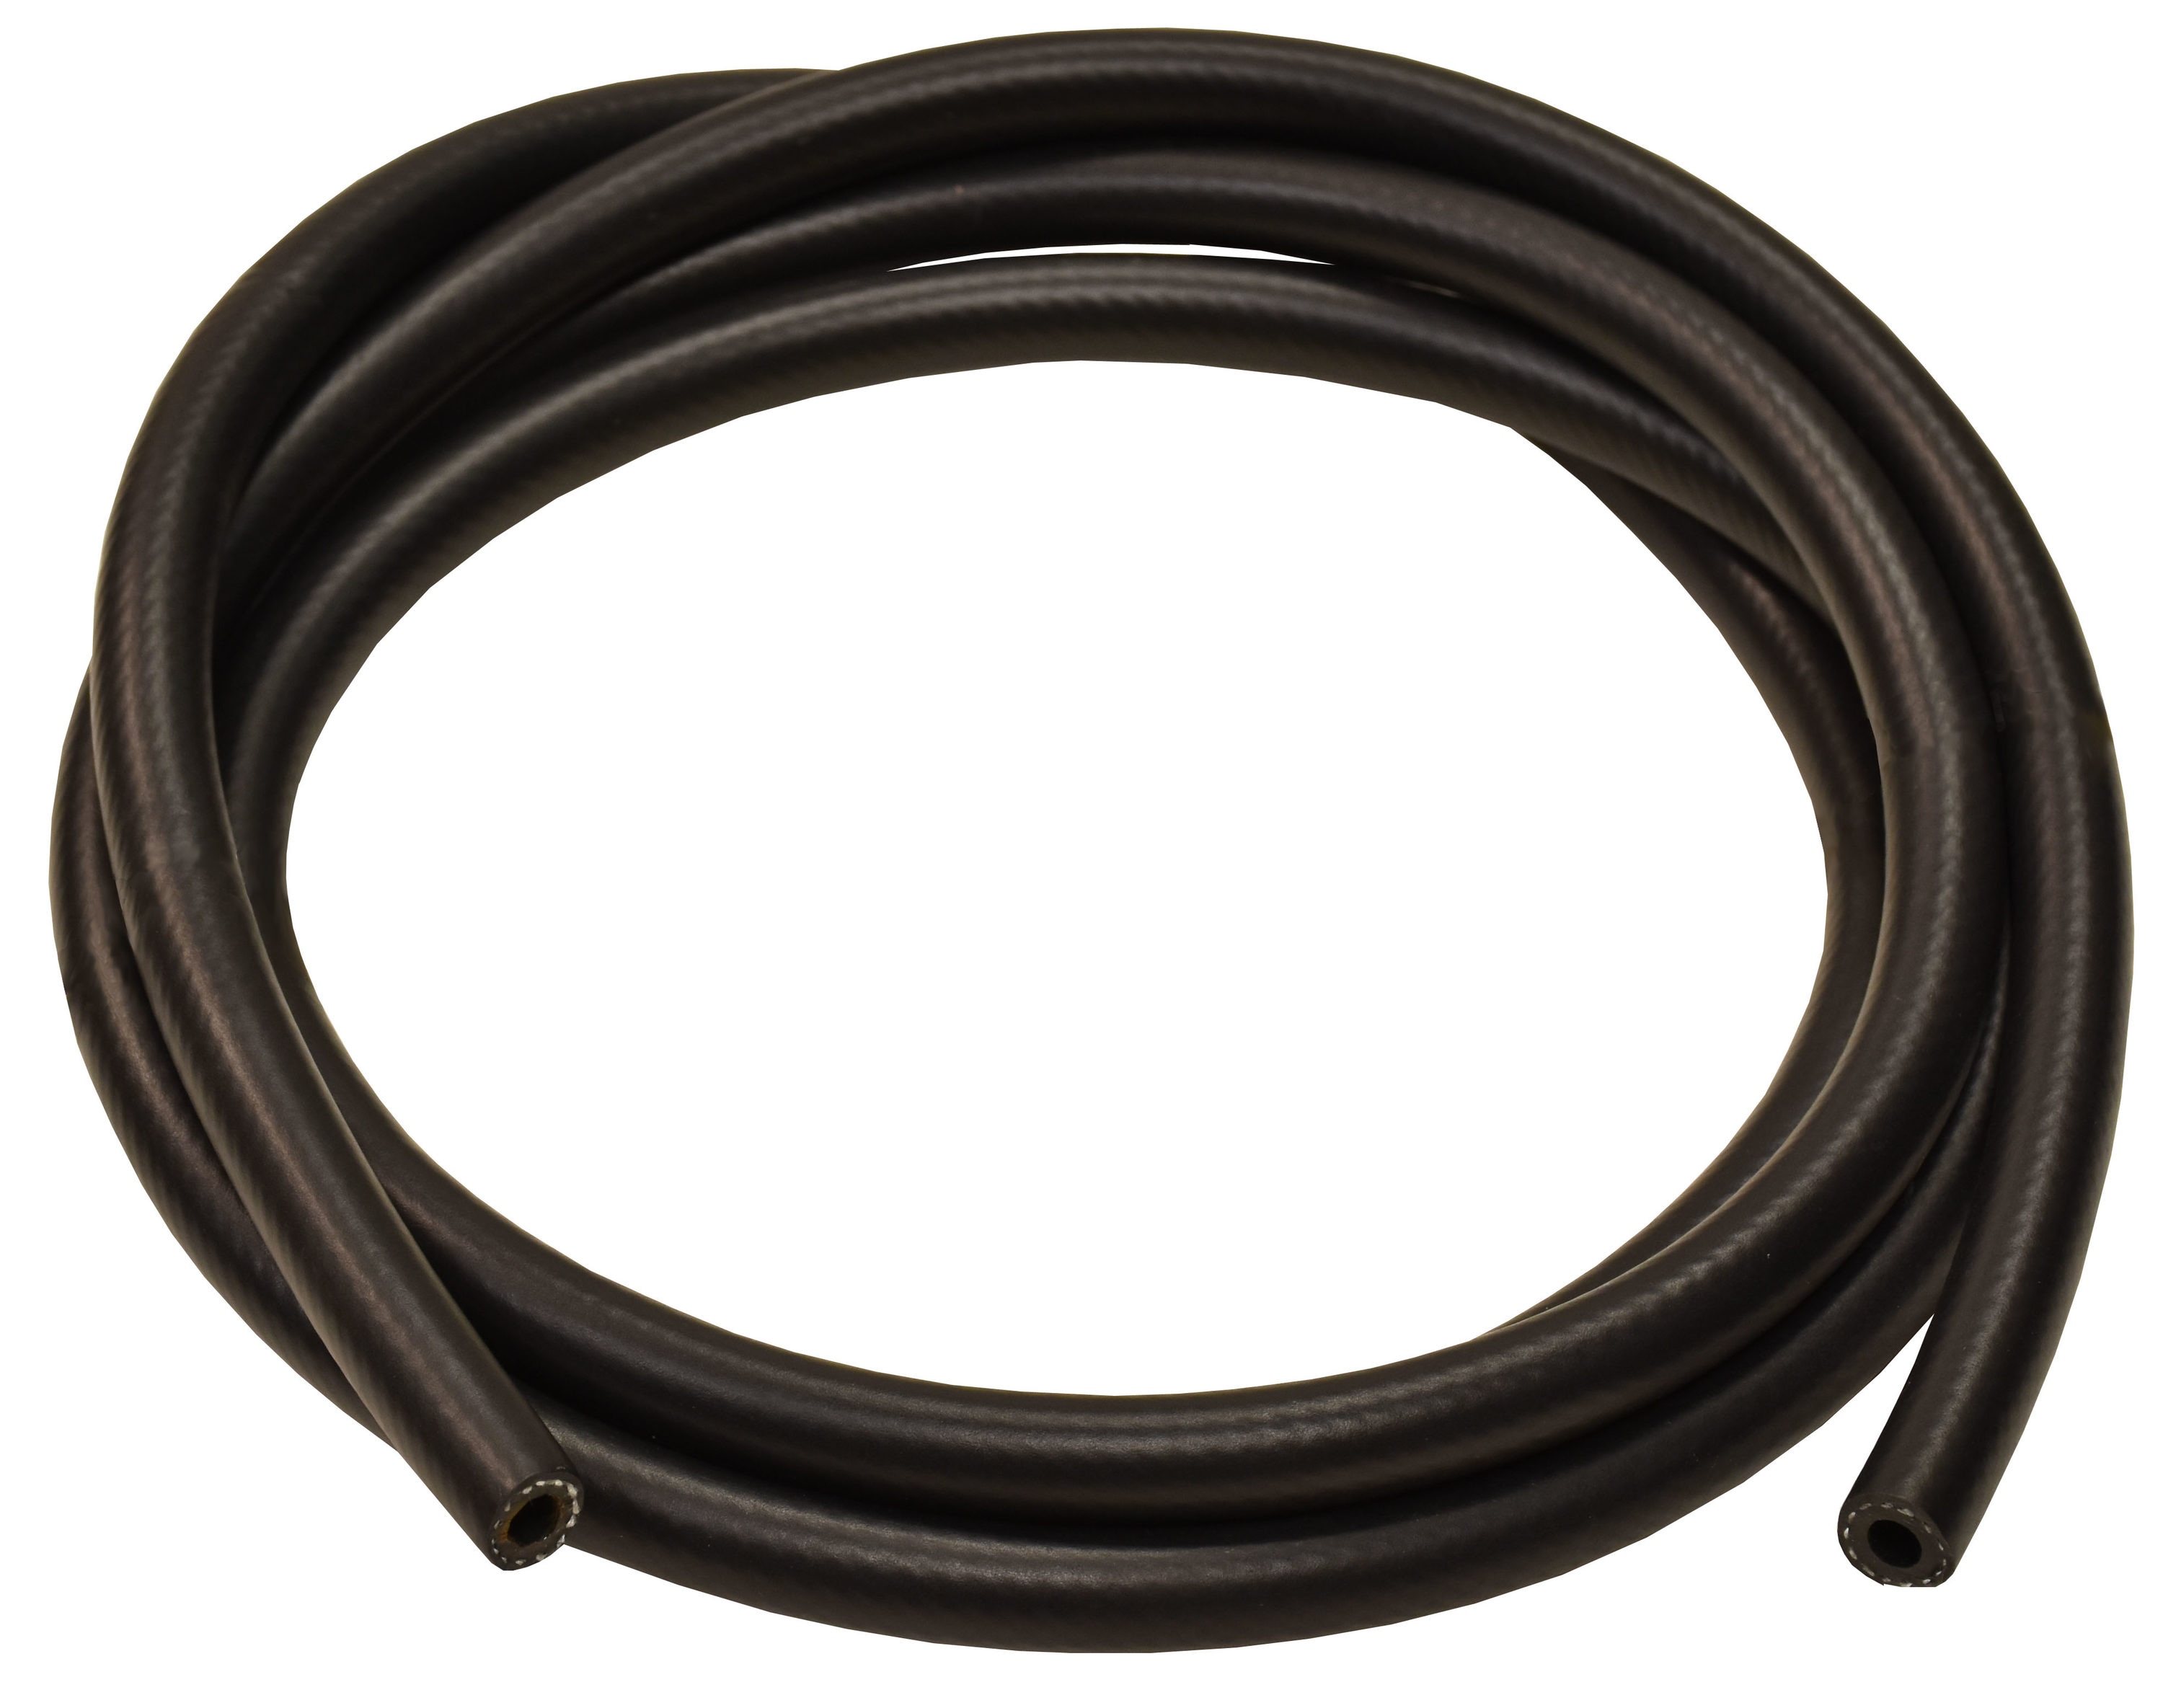 Reinforced Rubber Fuel Hose Choose you inner and outer diameters and Length! 